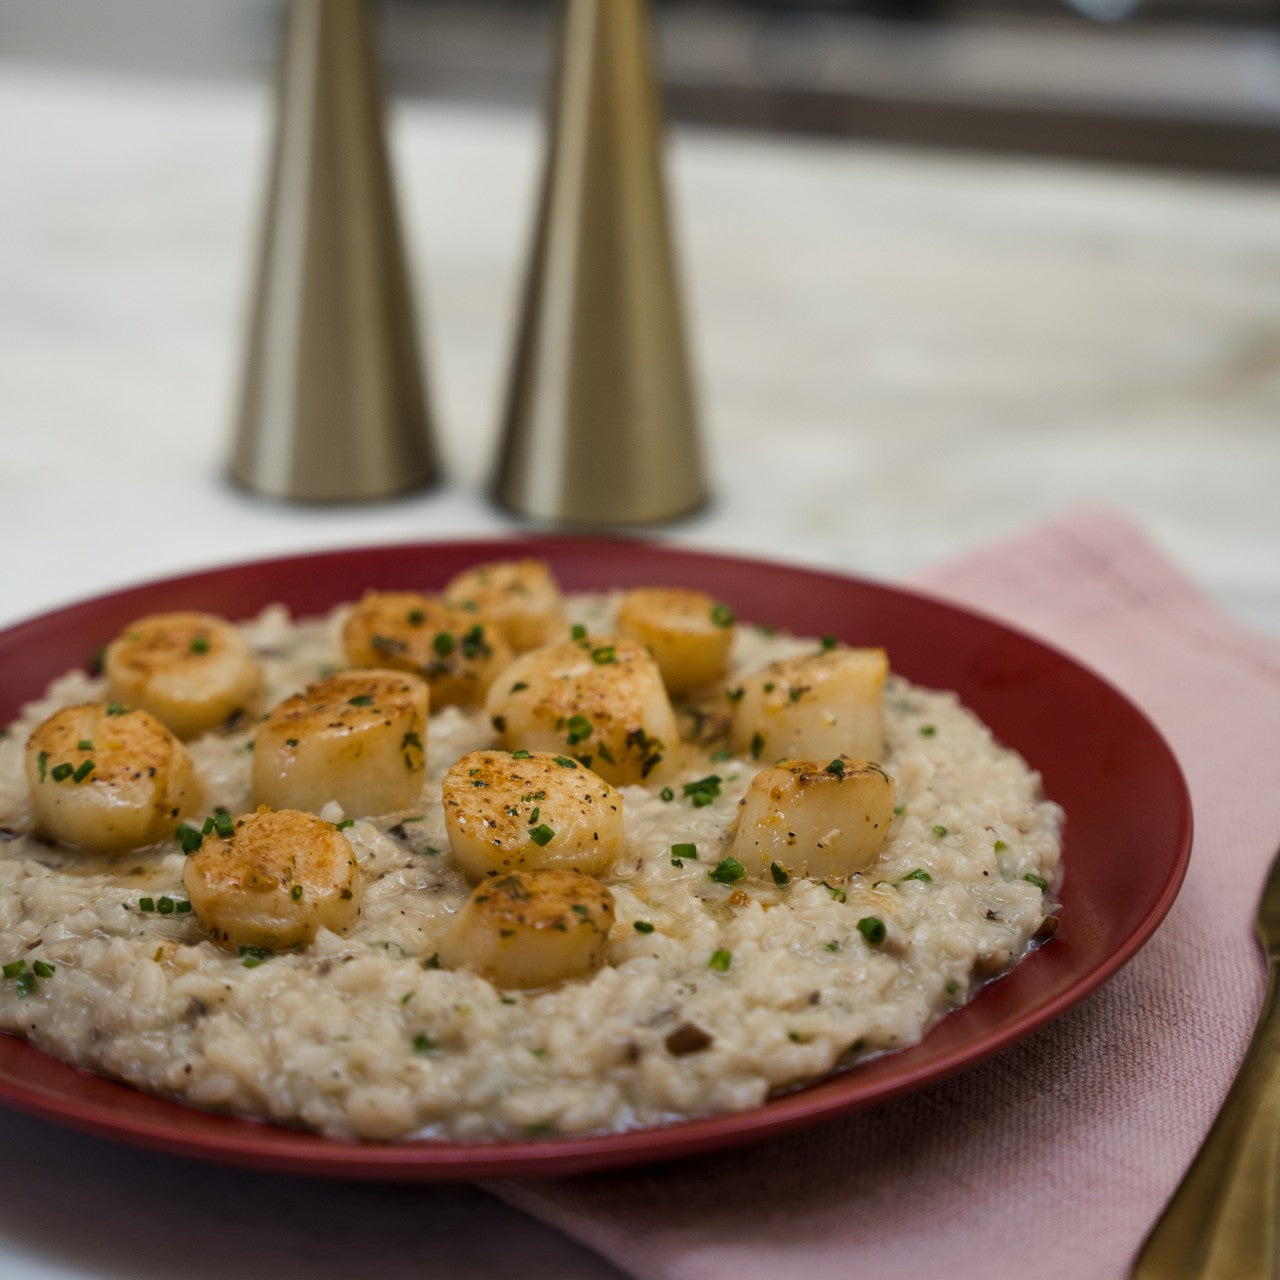  - Lemon-Butter Scallops With Truffle Risotto